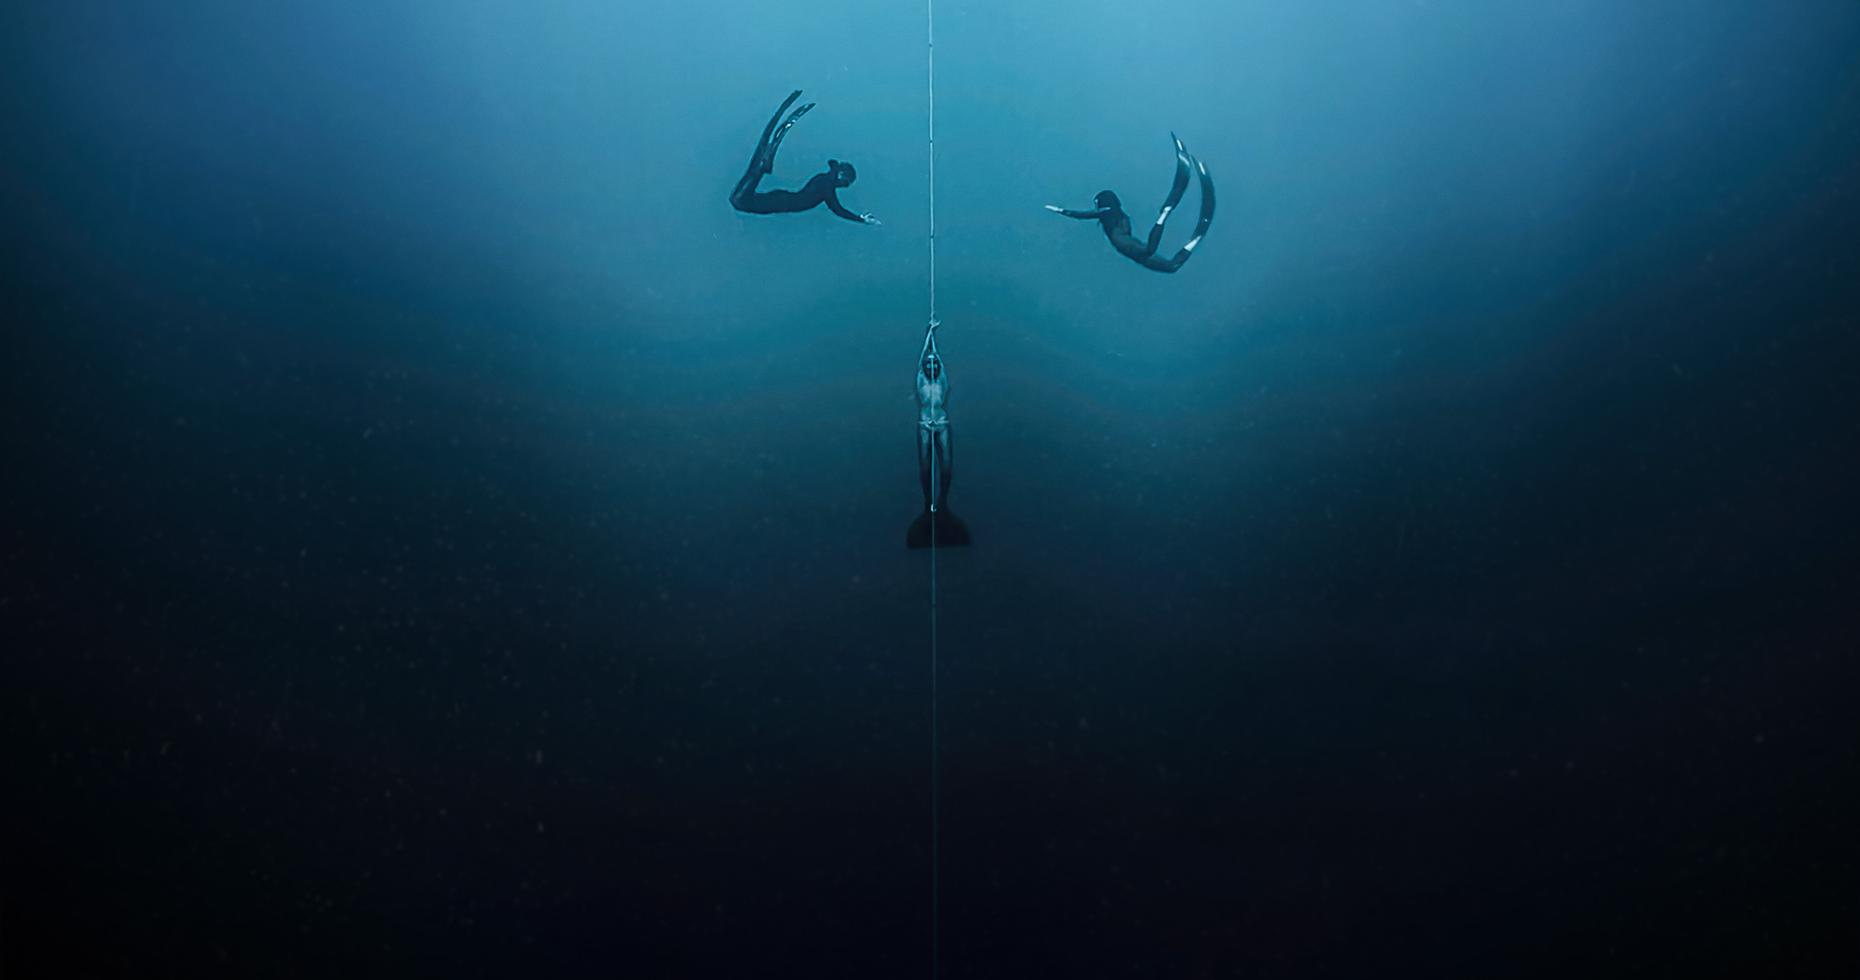 Freedivers Describe Using "Mind Over Matter" Technique To Hold Breath For A Long Time Period